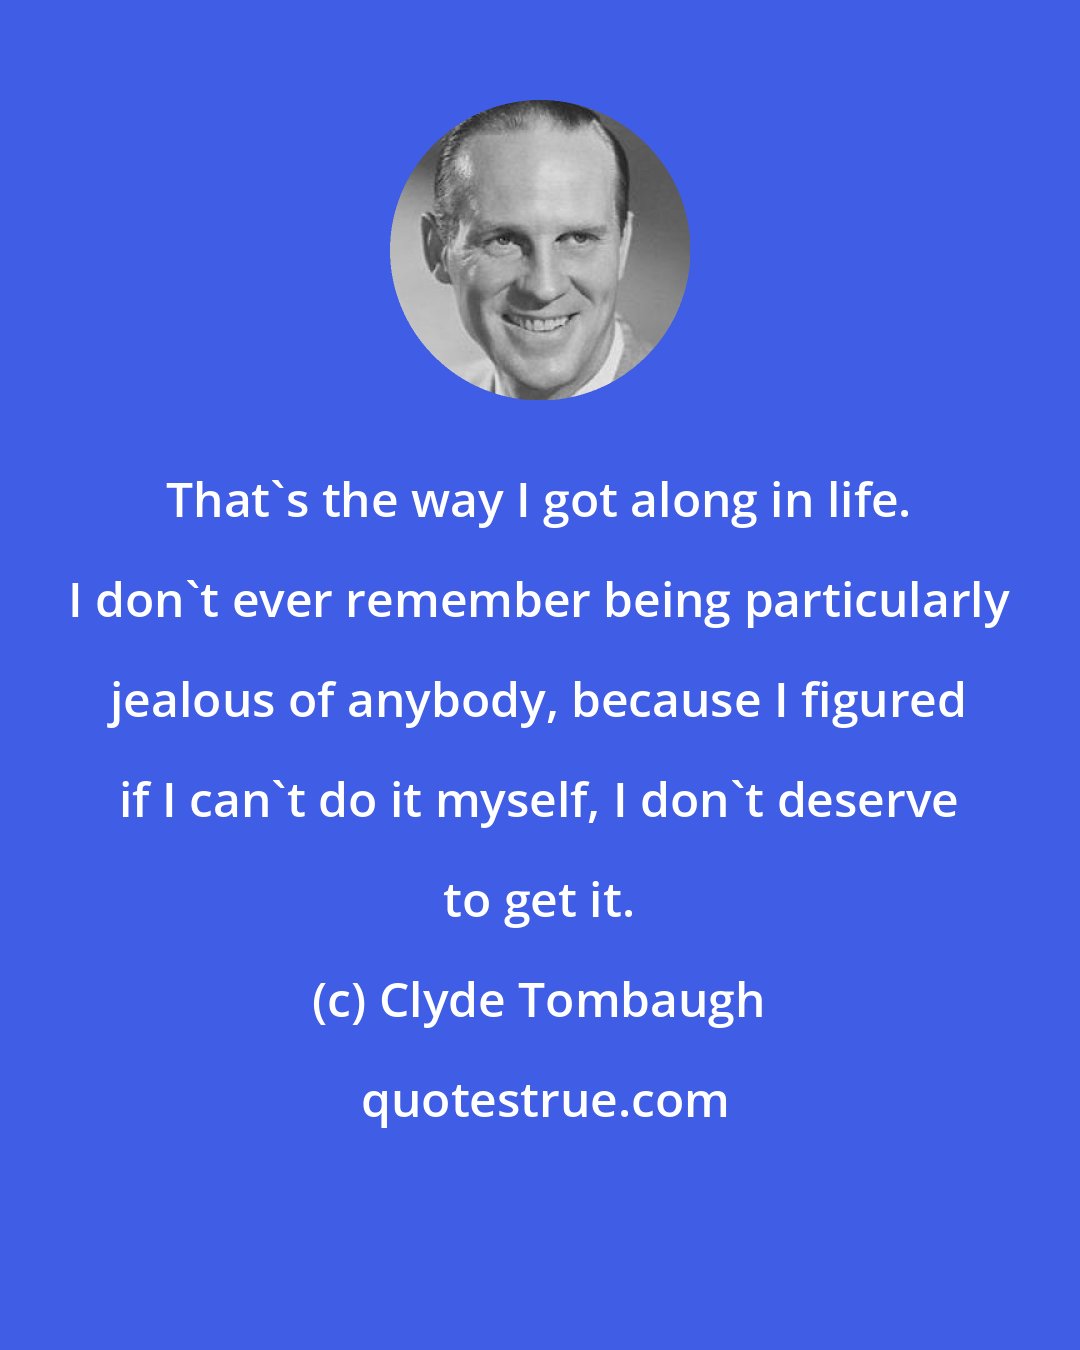 Clyde Tombaugh: That's the way I got along in life. I don't ever remember being particularly jealous of anybody, because I figured if I can't do it myself, I don't deserve to get it.